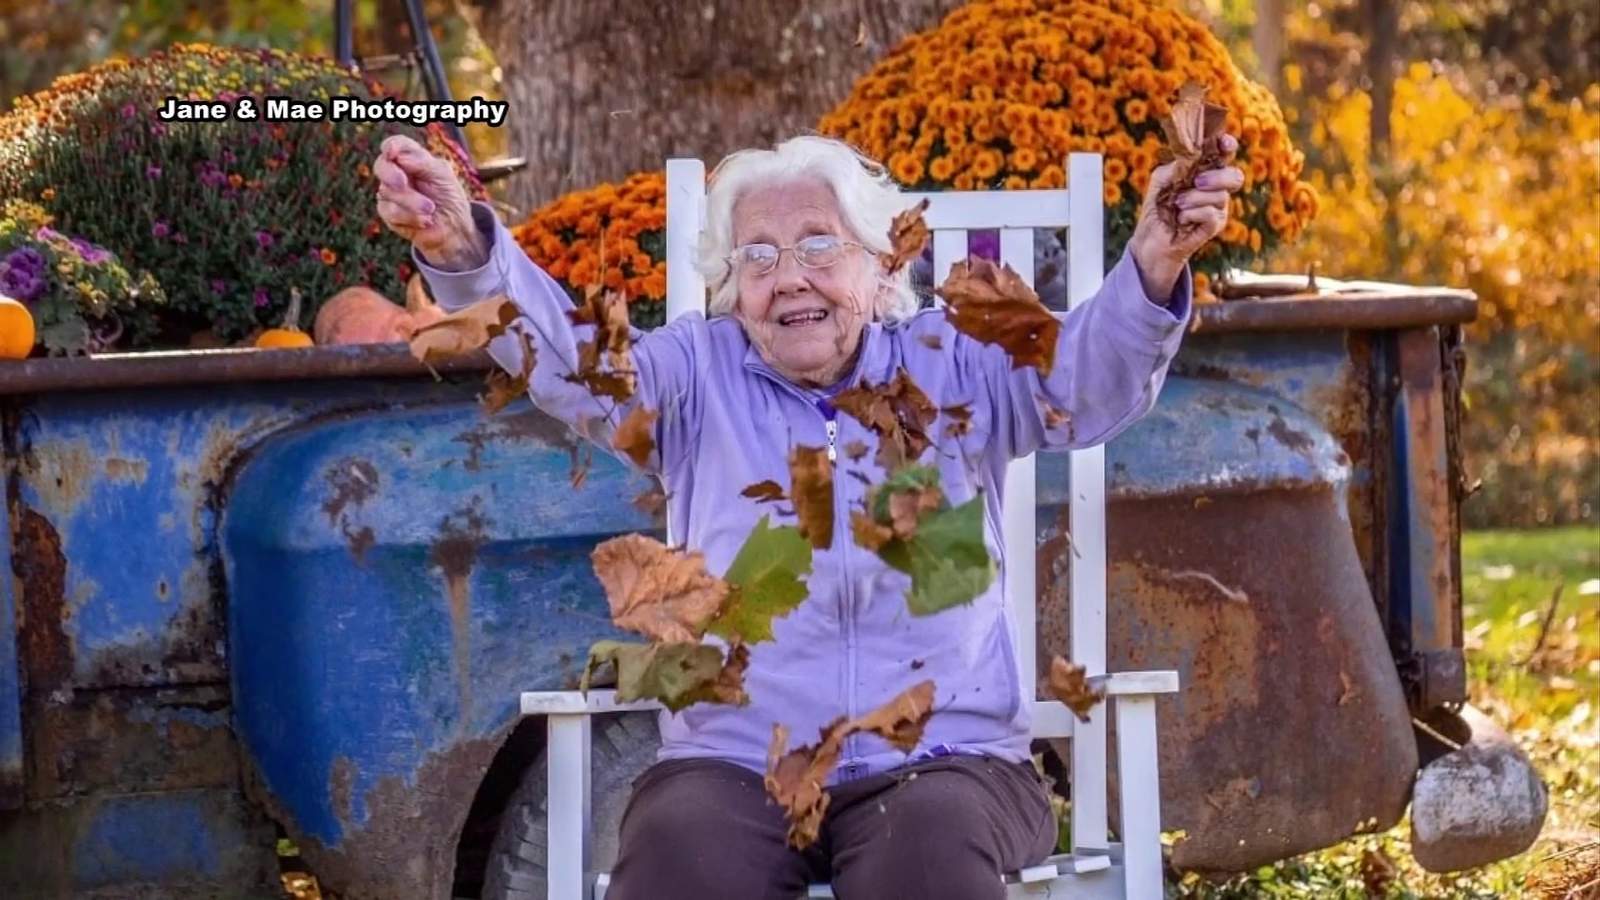 Alleghany County assisted living facility getting attention for its whimsical photoshoot